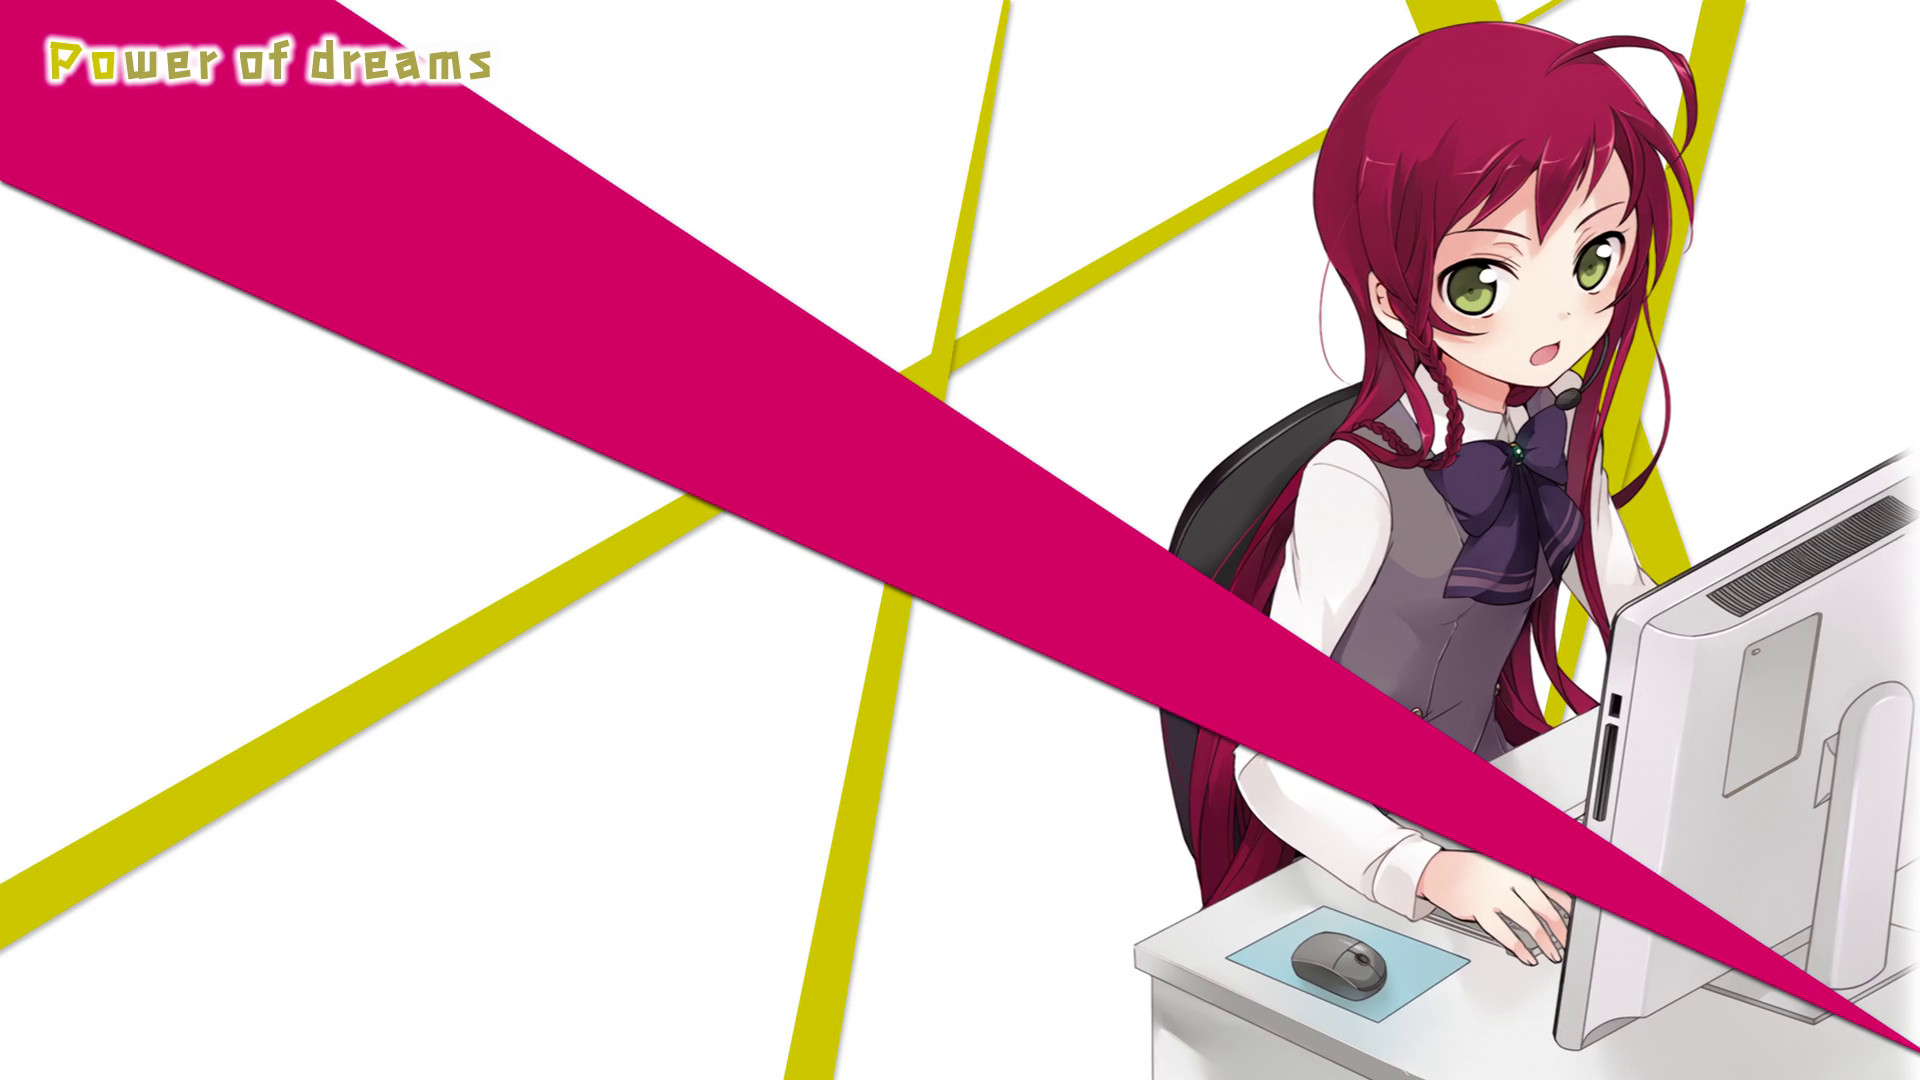 1920x1080 Power of dreams, Yusa Emi on her job, and also a fanmade wallpaper.